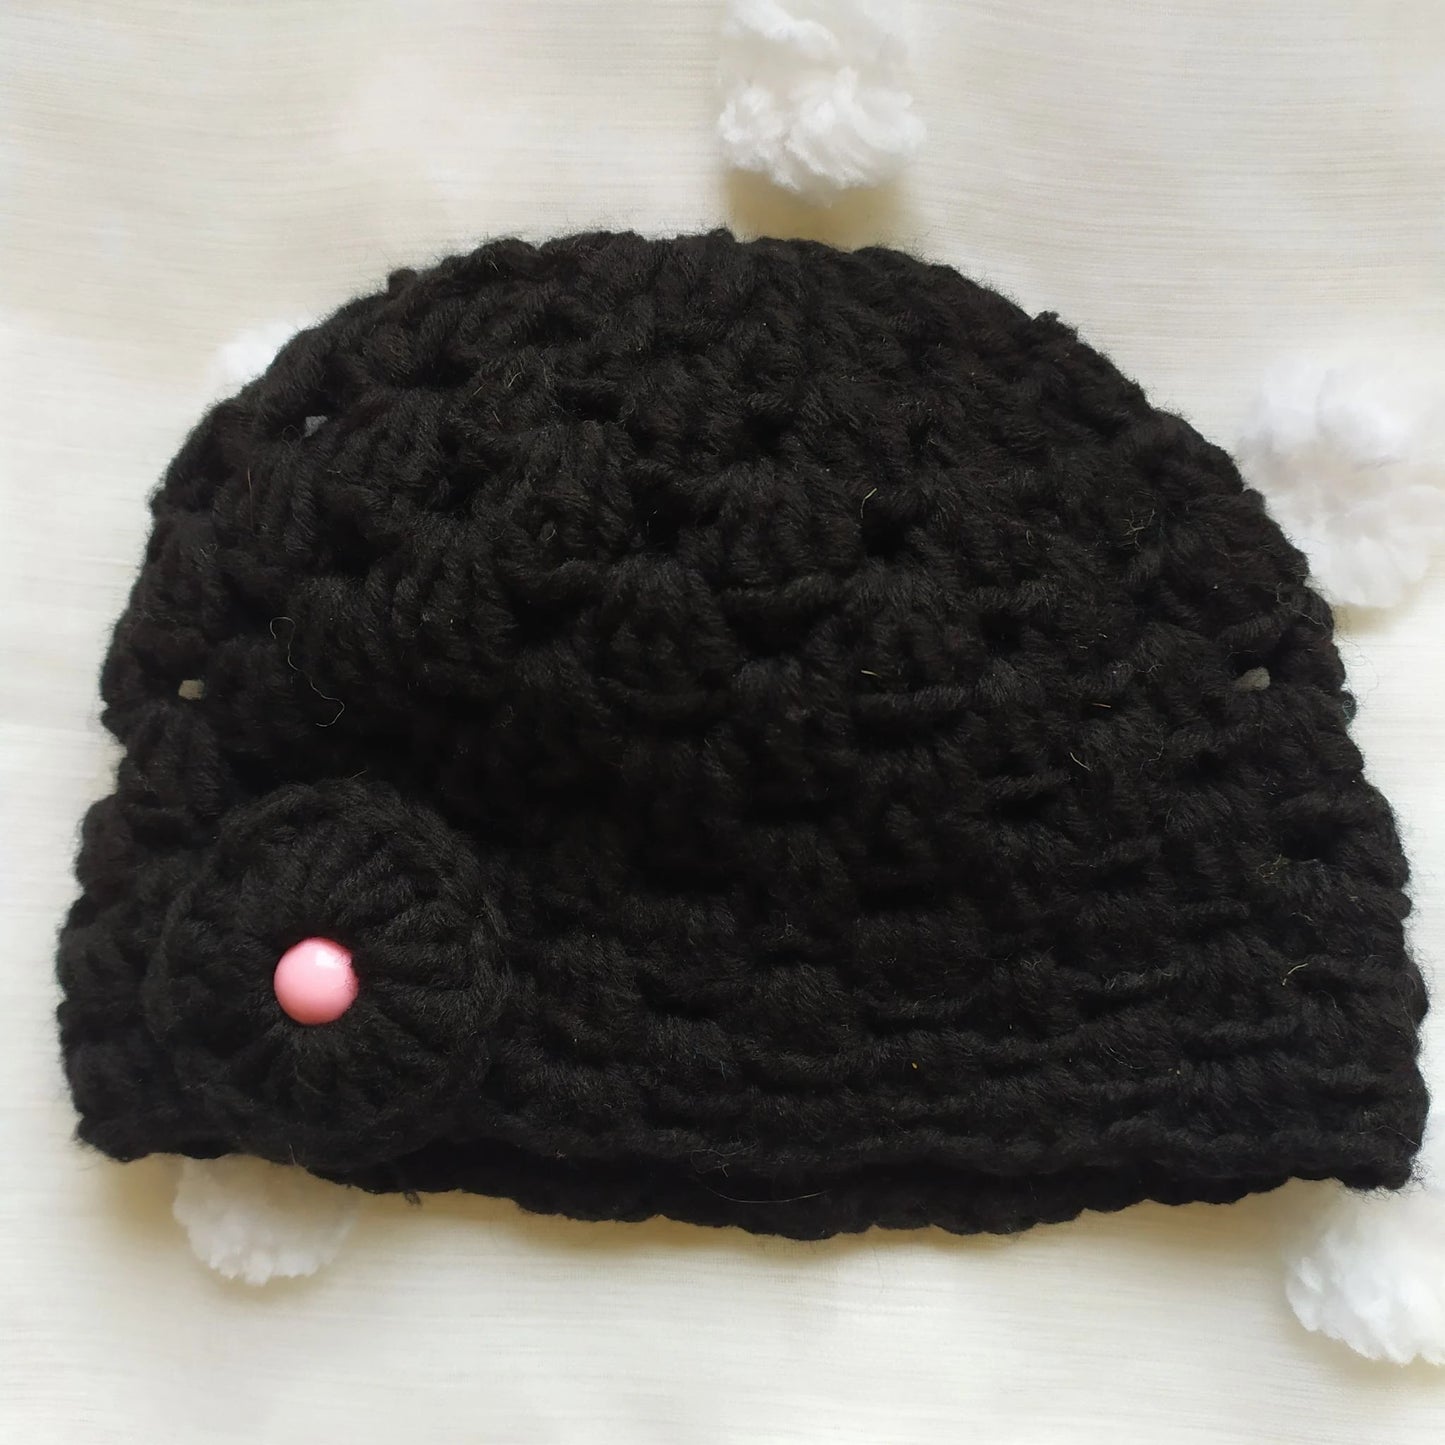 Girls Hat - Age 2-4 yrs approx